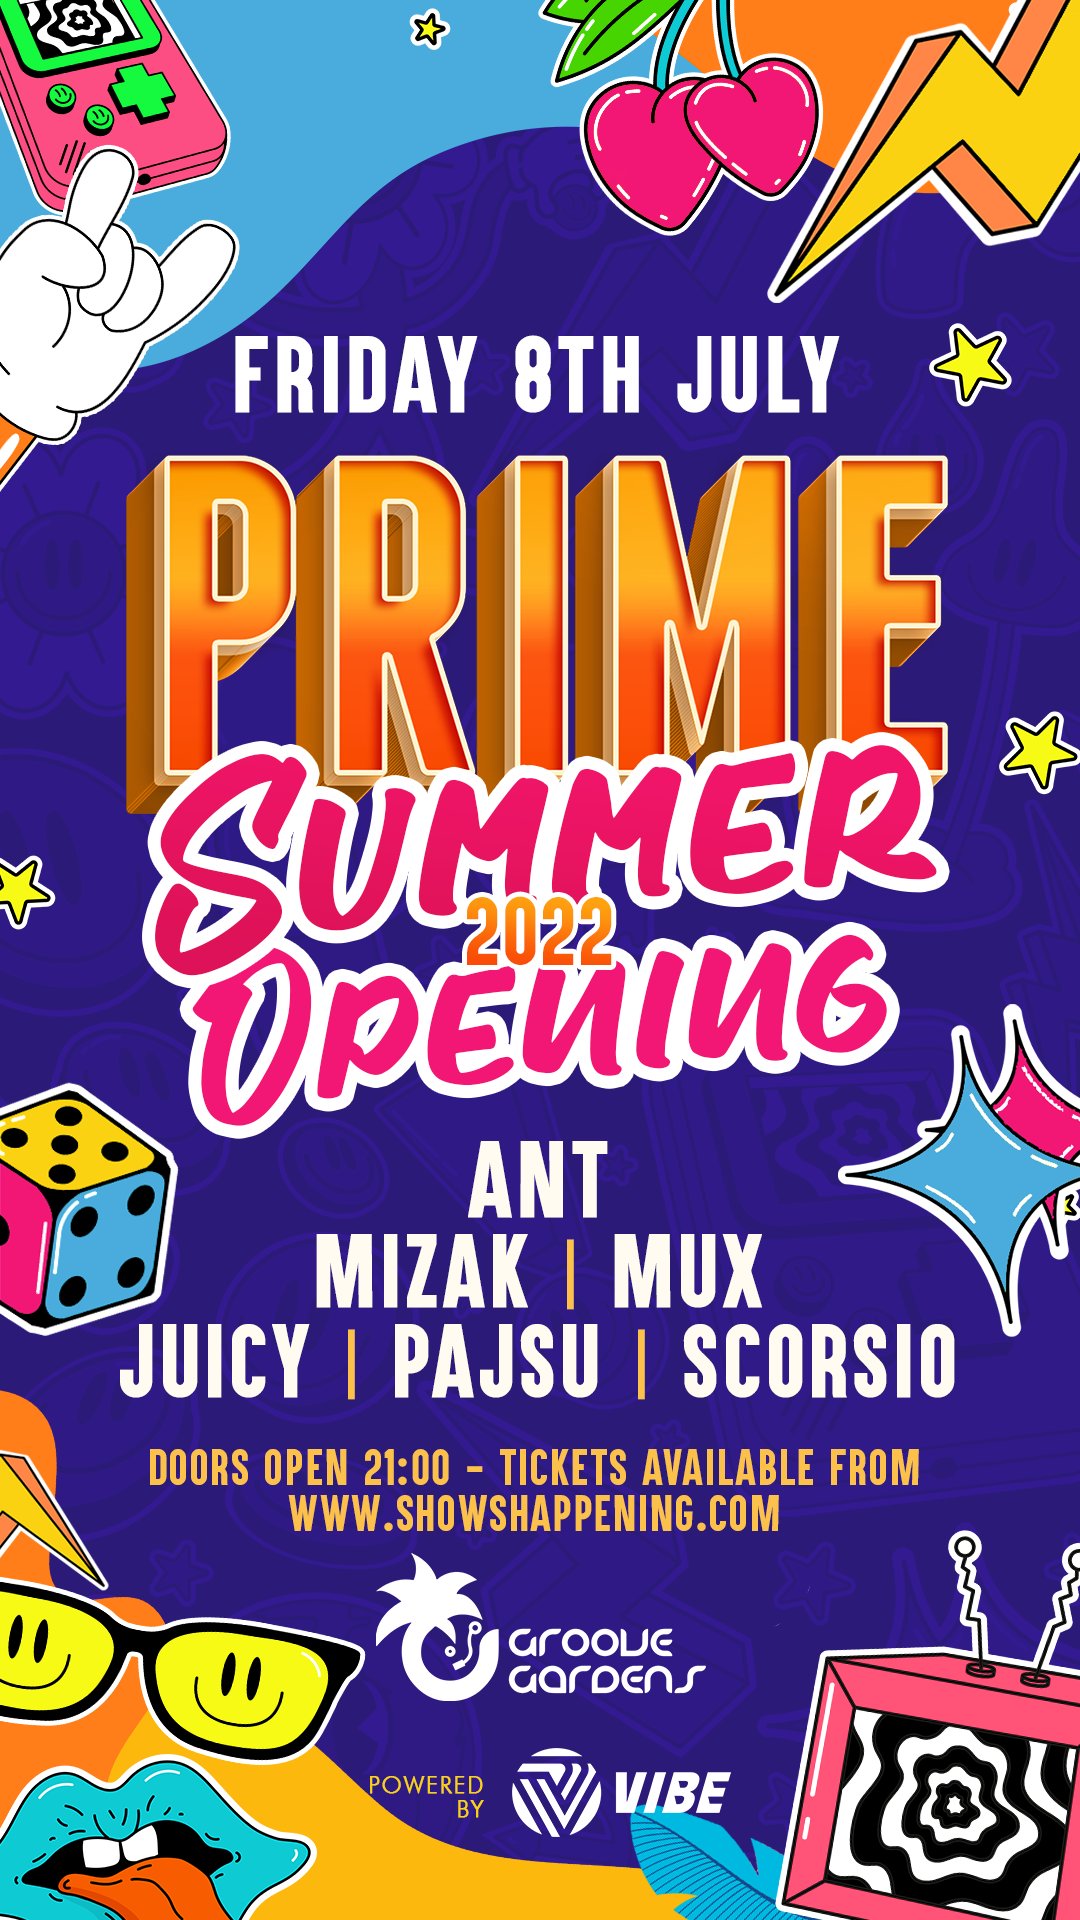 Prime | Summer Opening 2022 poster